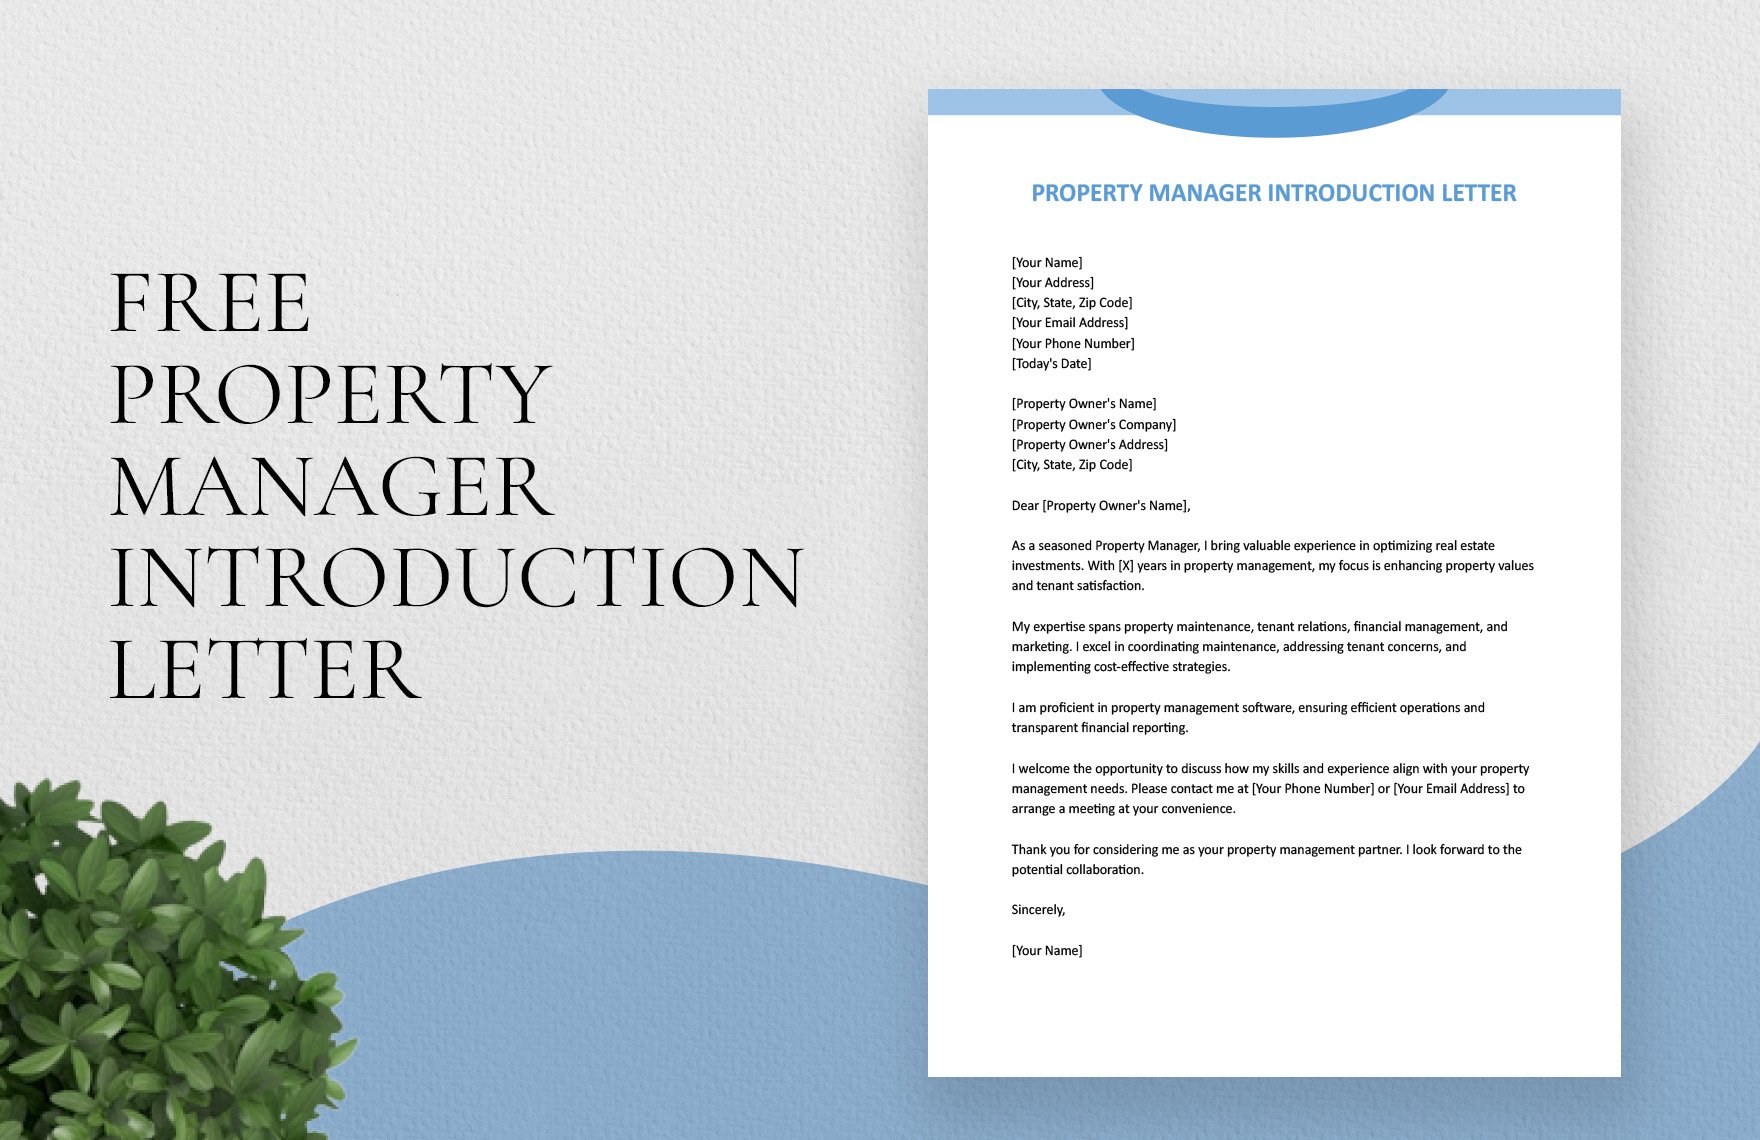 Free Property Manager Introduction Letter